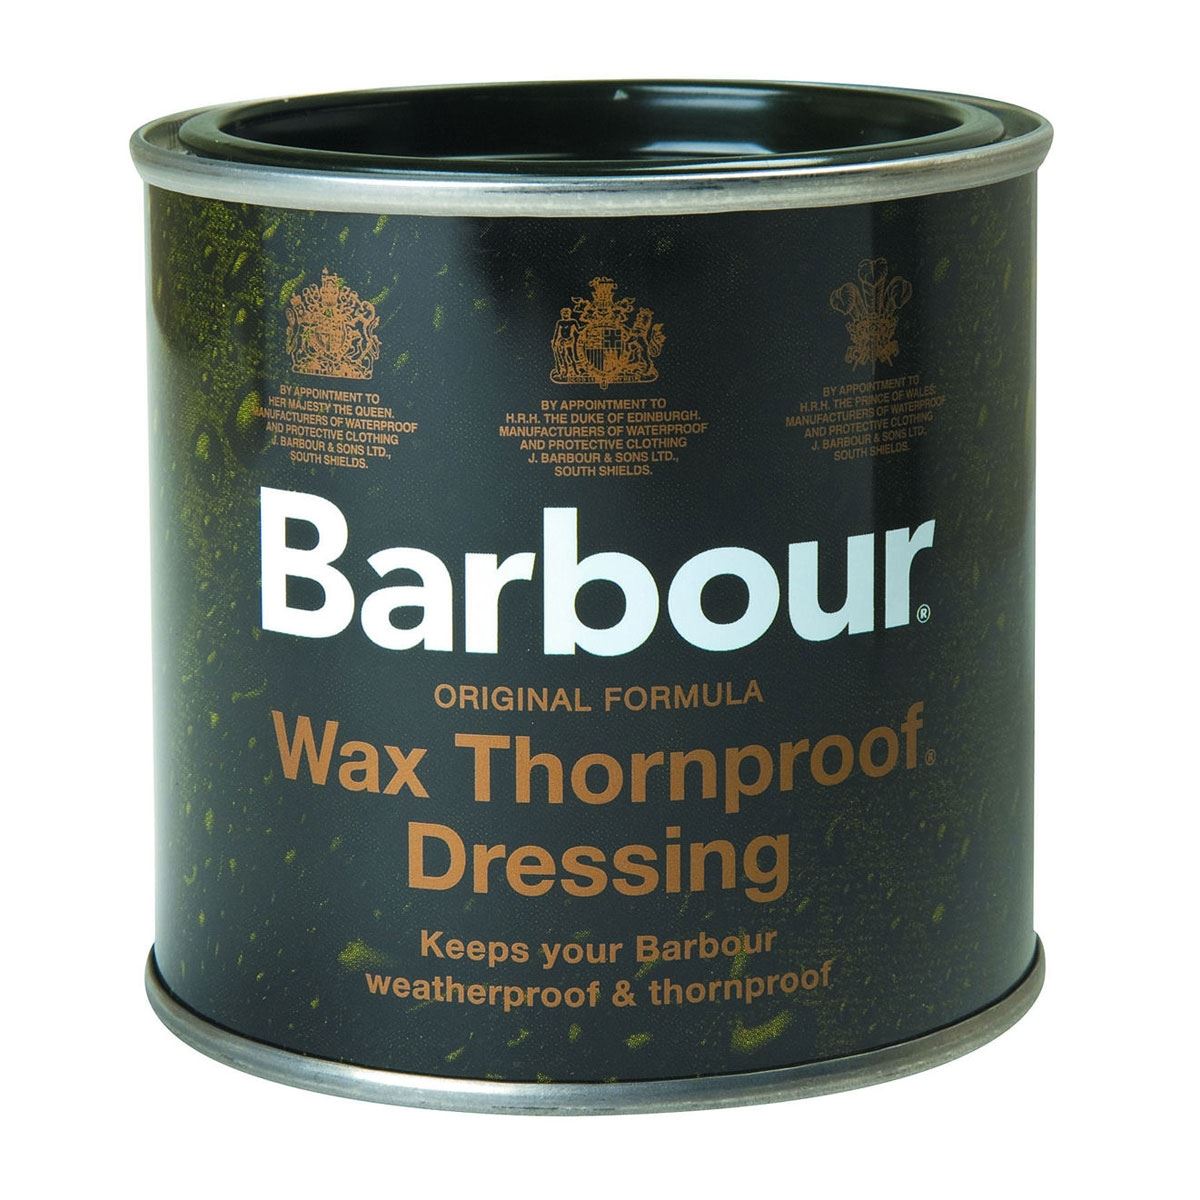 What effects does Barbour Wax have on the jacket?